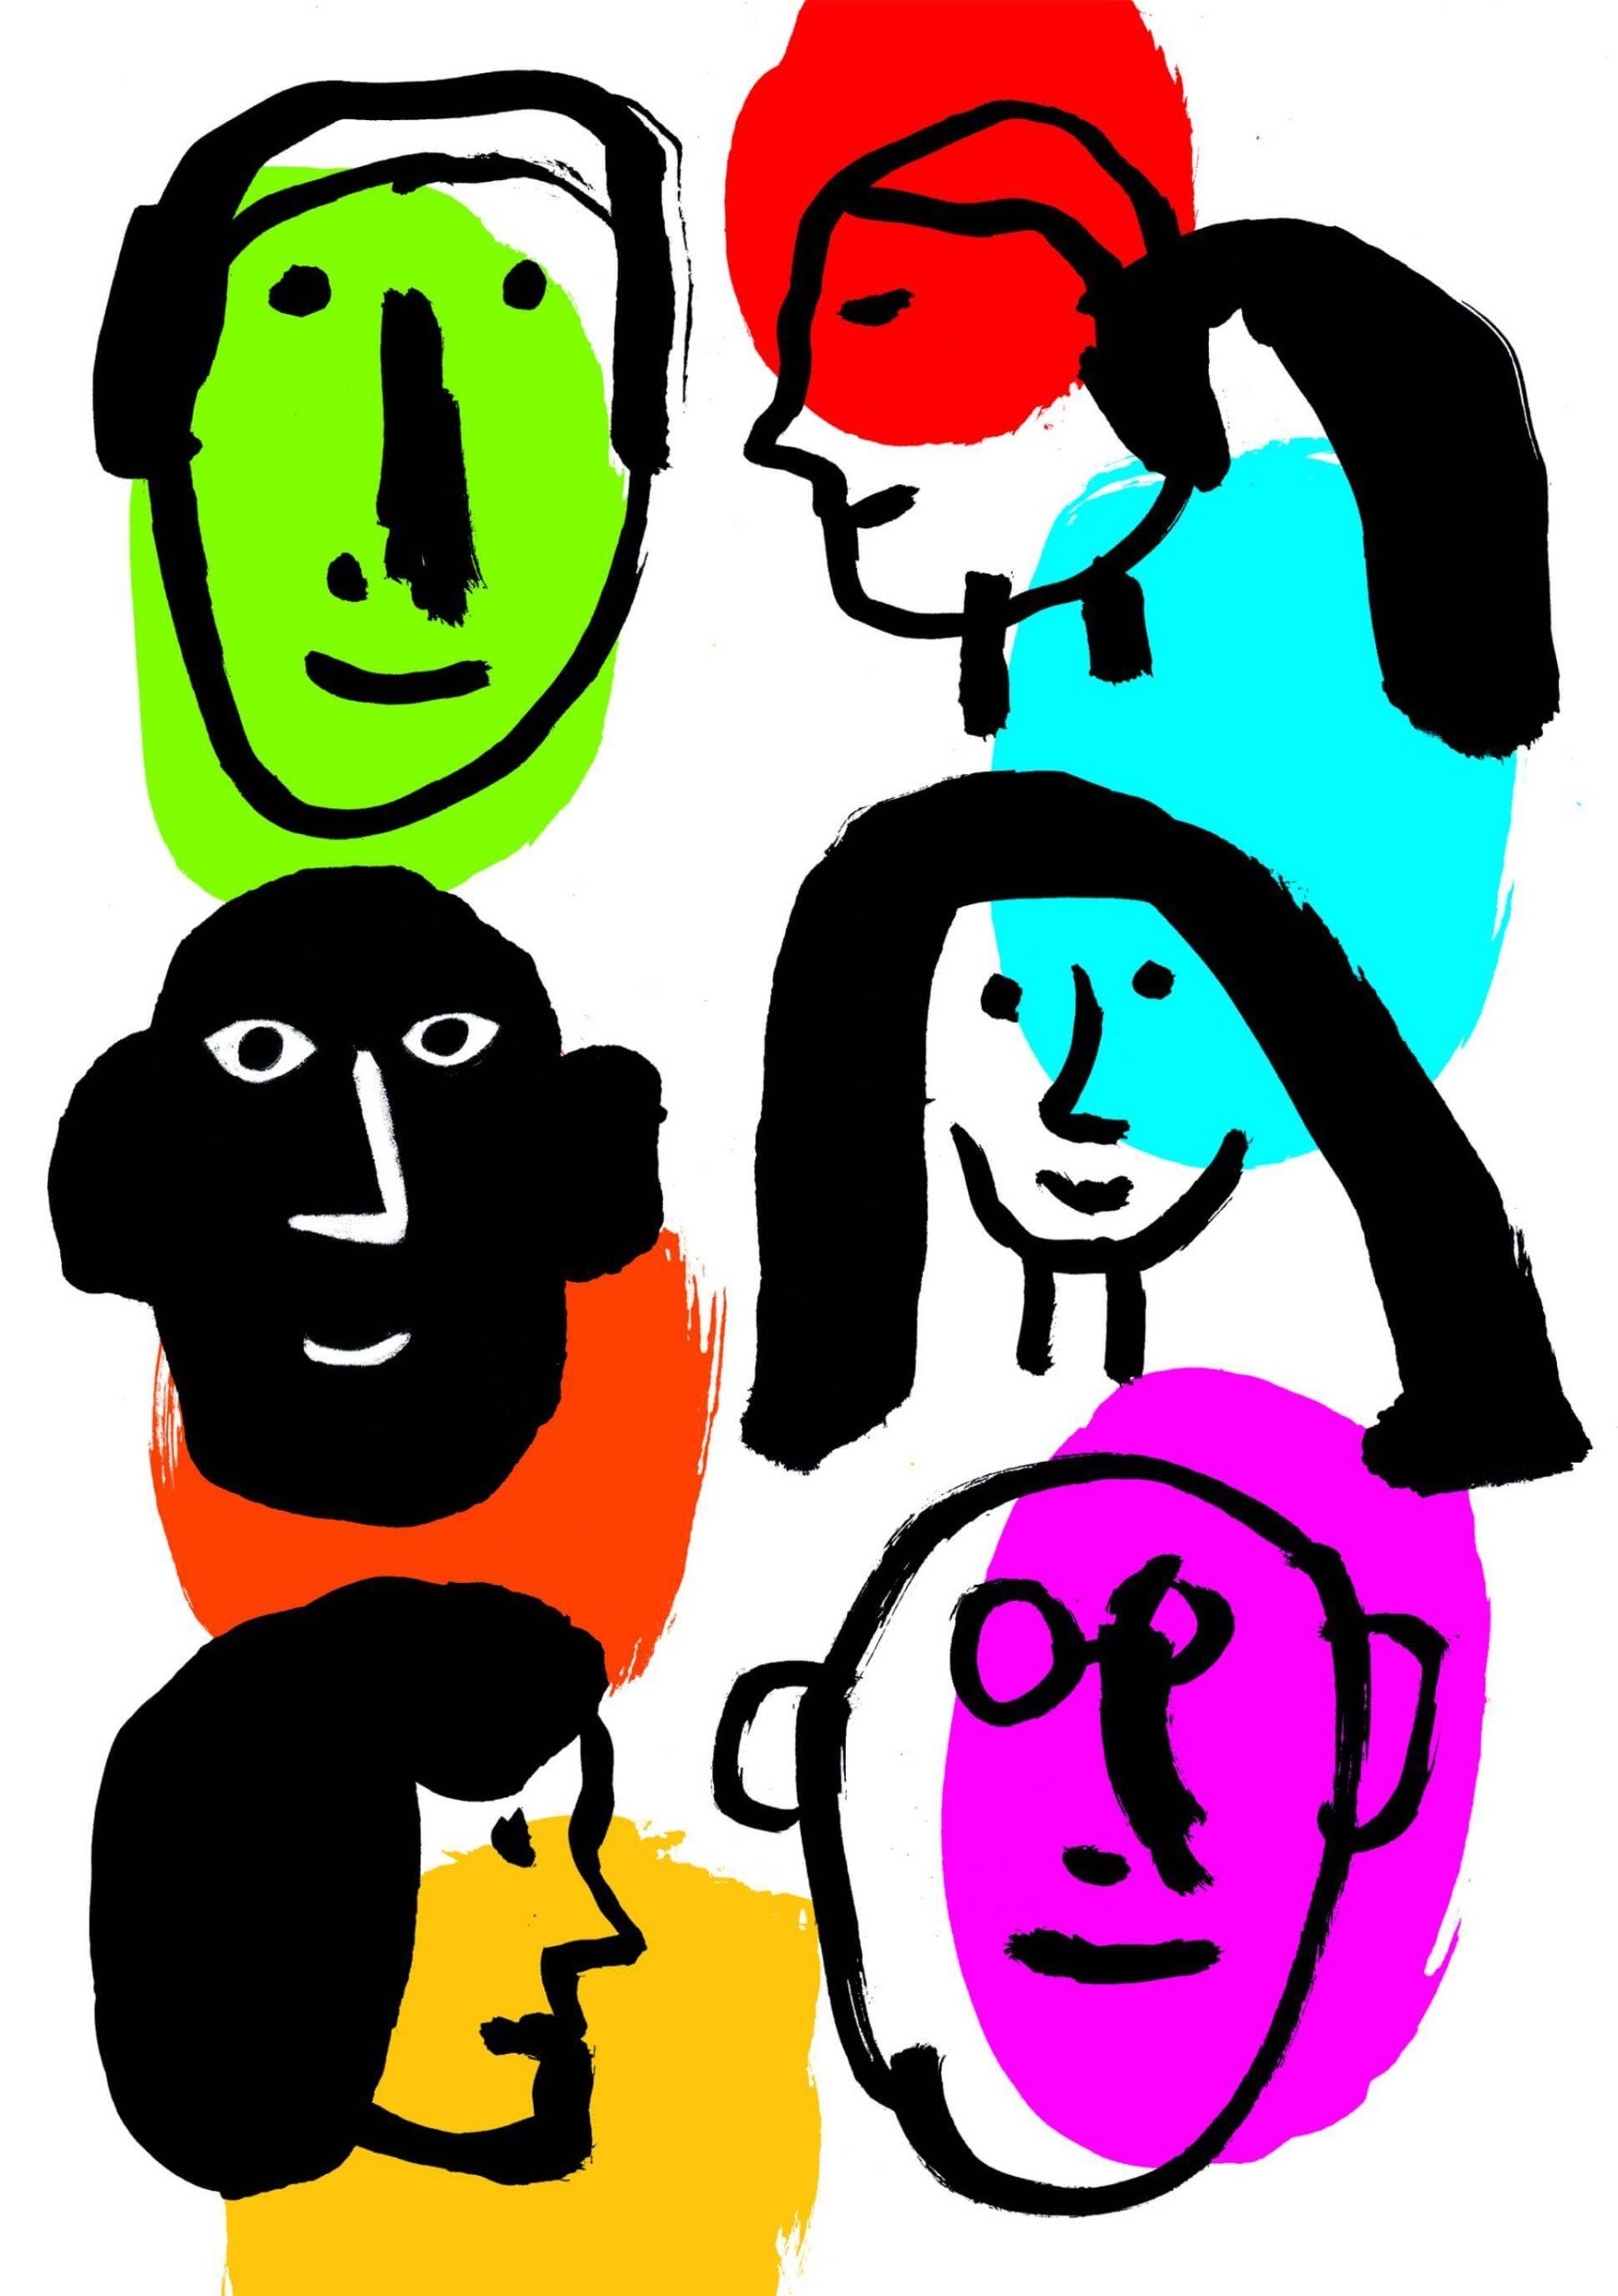 Illustration of faces